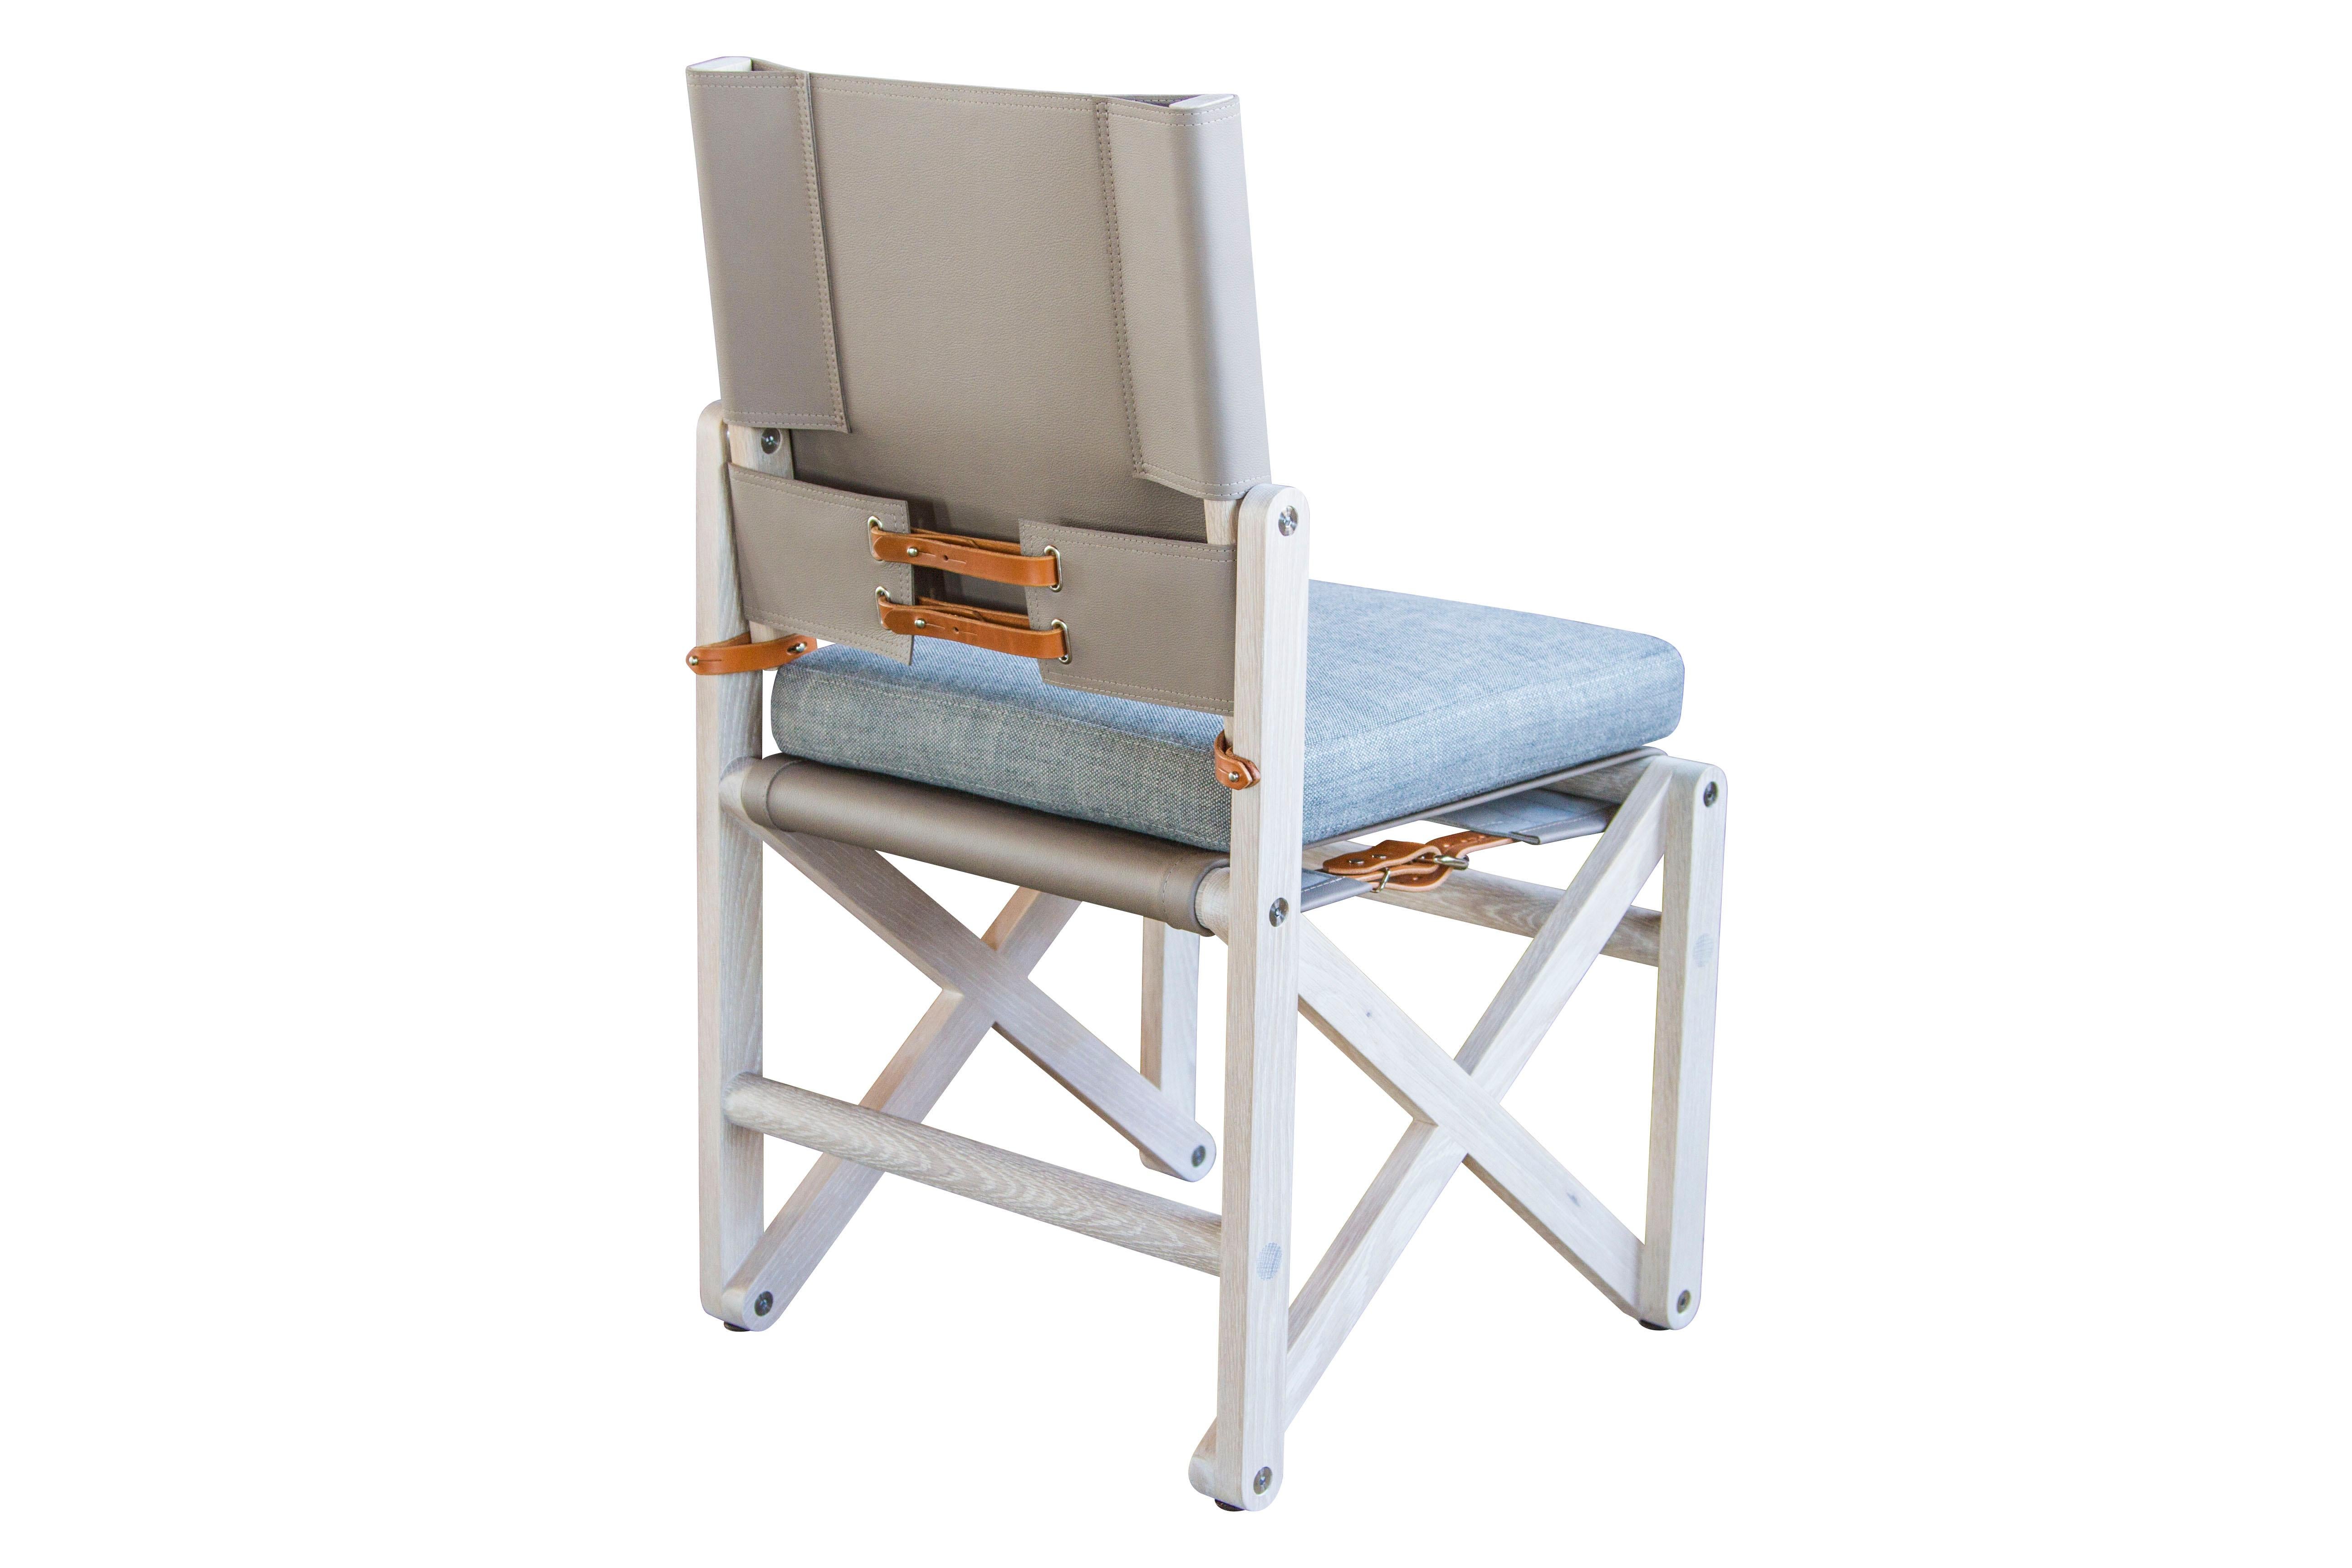 The MacLaren Dining Chair 02 (armless) shown here in Bleached White Oak with Moore & Giles: Dresden / Pewter leather back sling; Perennials Rough and Rowdy / Pumice fabric seat cushion and cognac English bridle leather strapping.

The modern